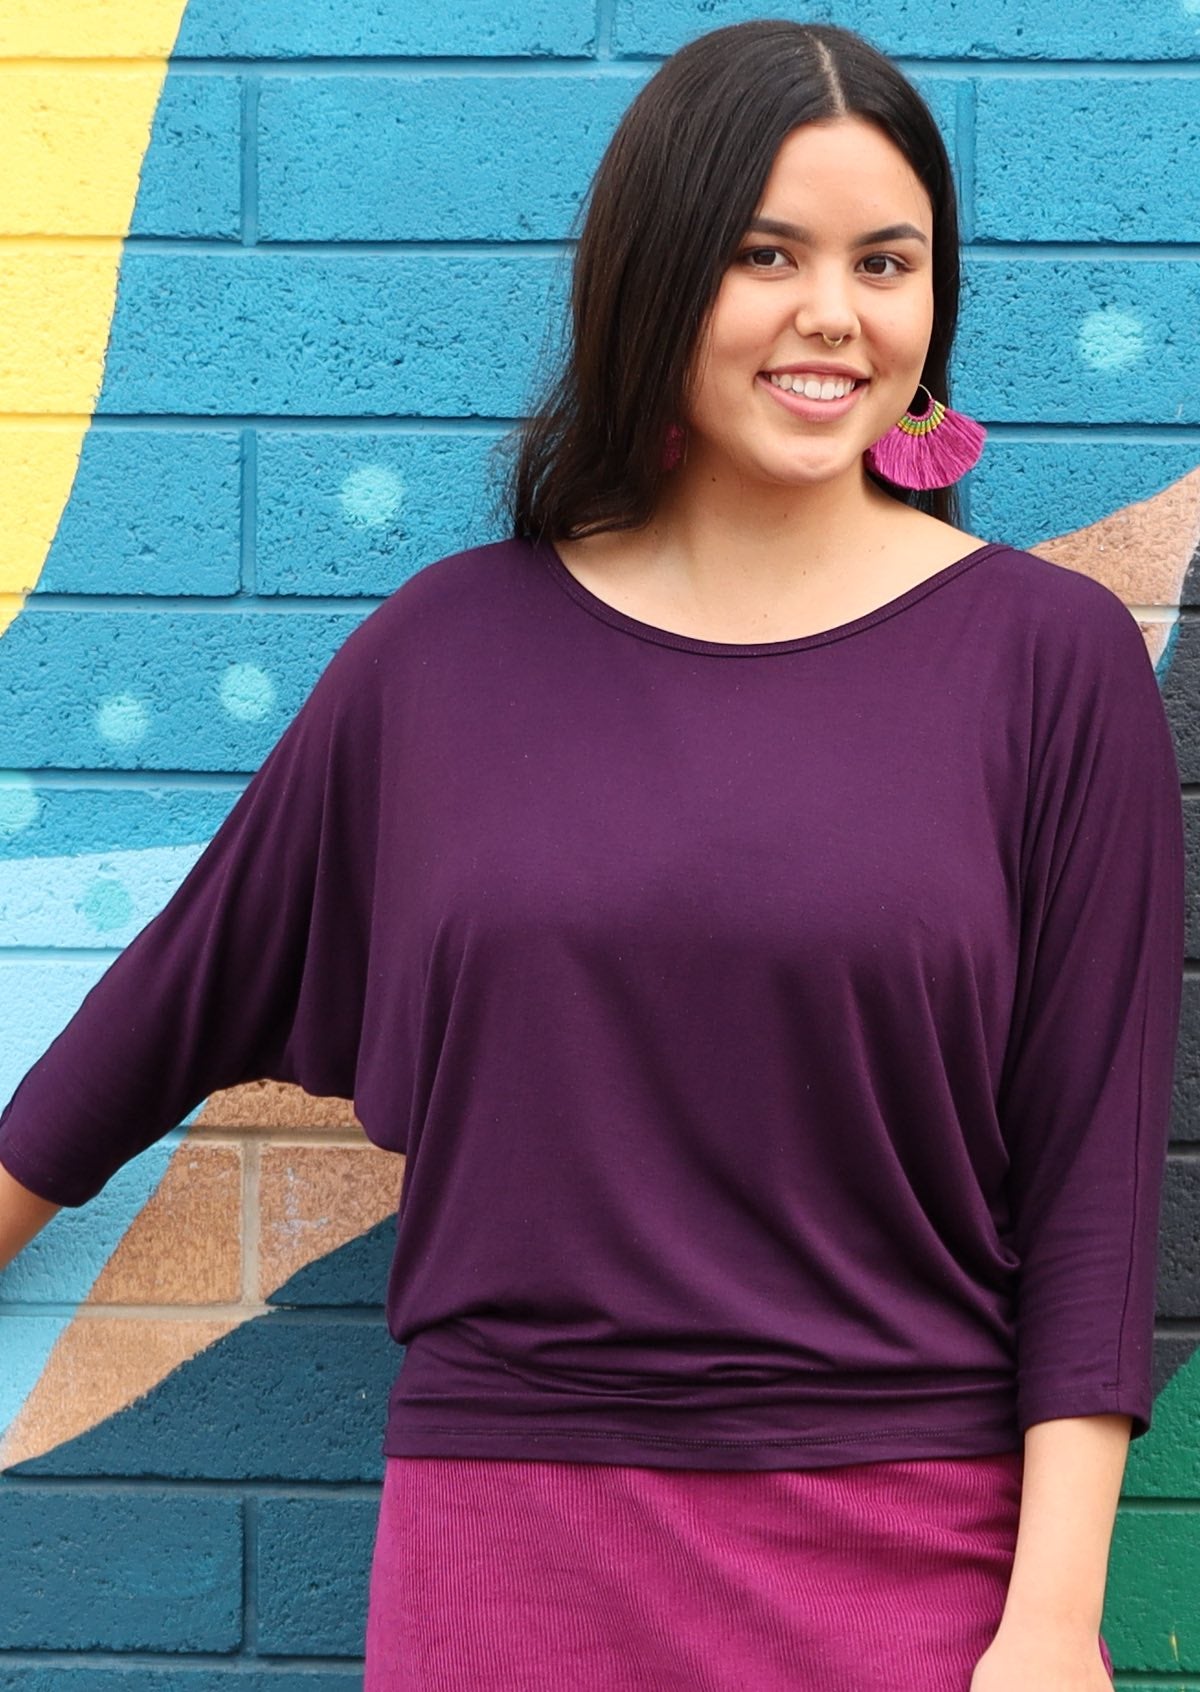 Woman wearing a 3/4 sleeve rayon batwing round neckline purple top.